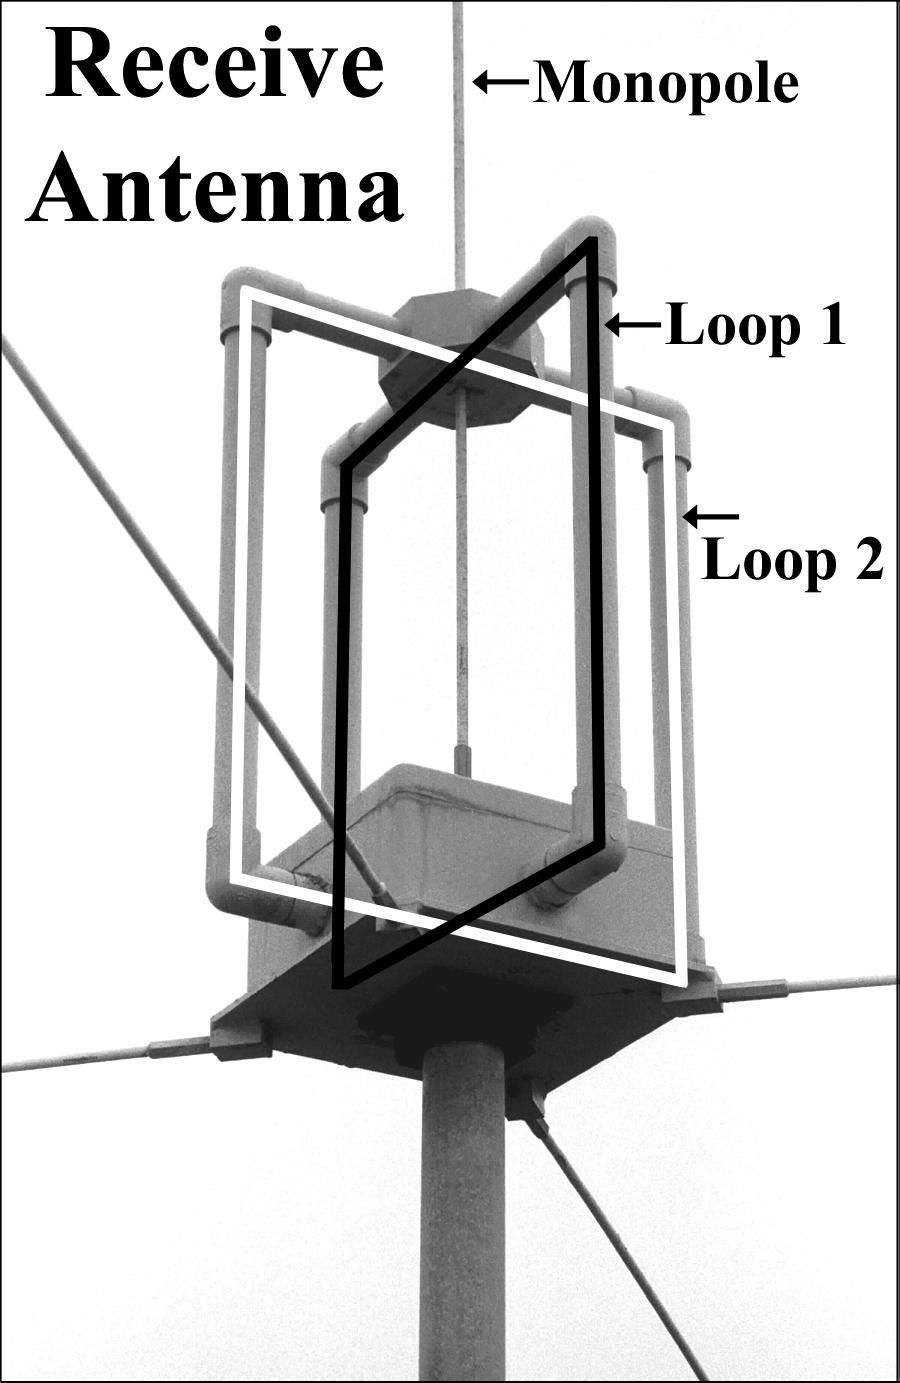 A closer look at a typical receive antenna, shows SeaSonde s design principles of compactness, simplicity and ruggedness. Three antennas are combined in one unit.